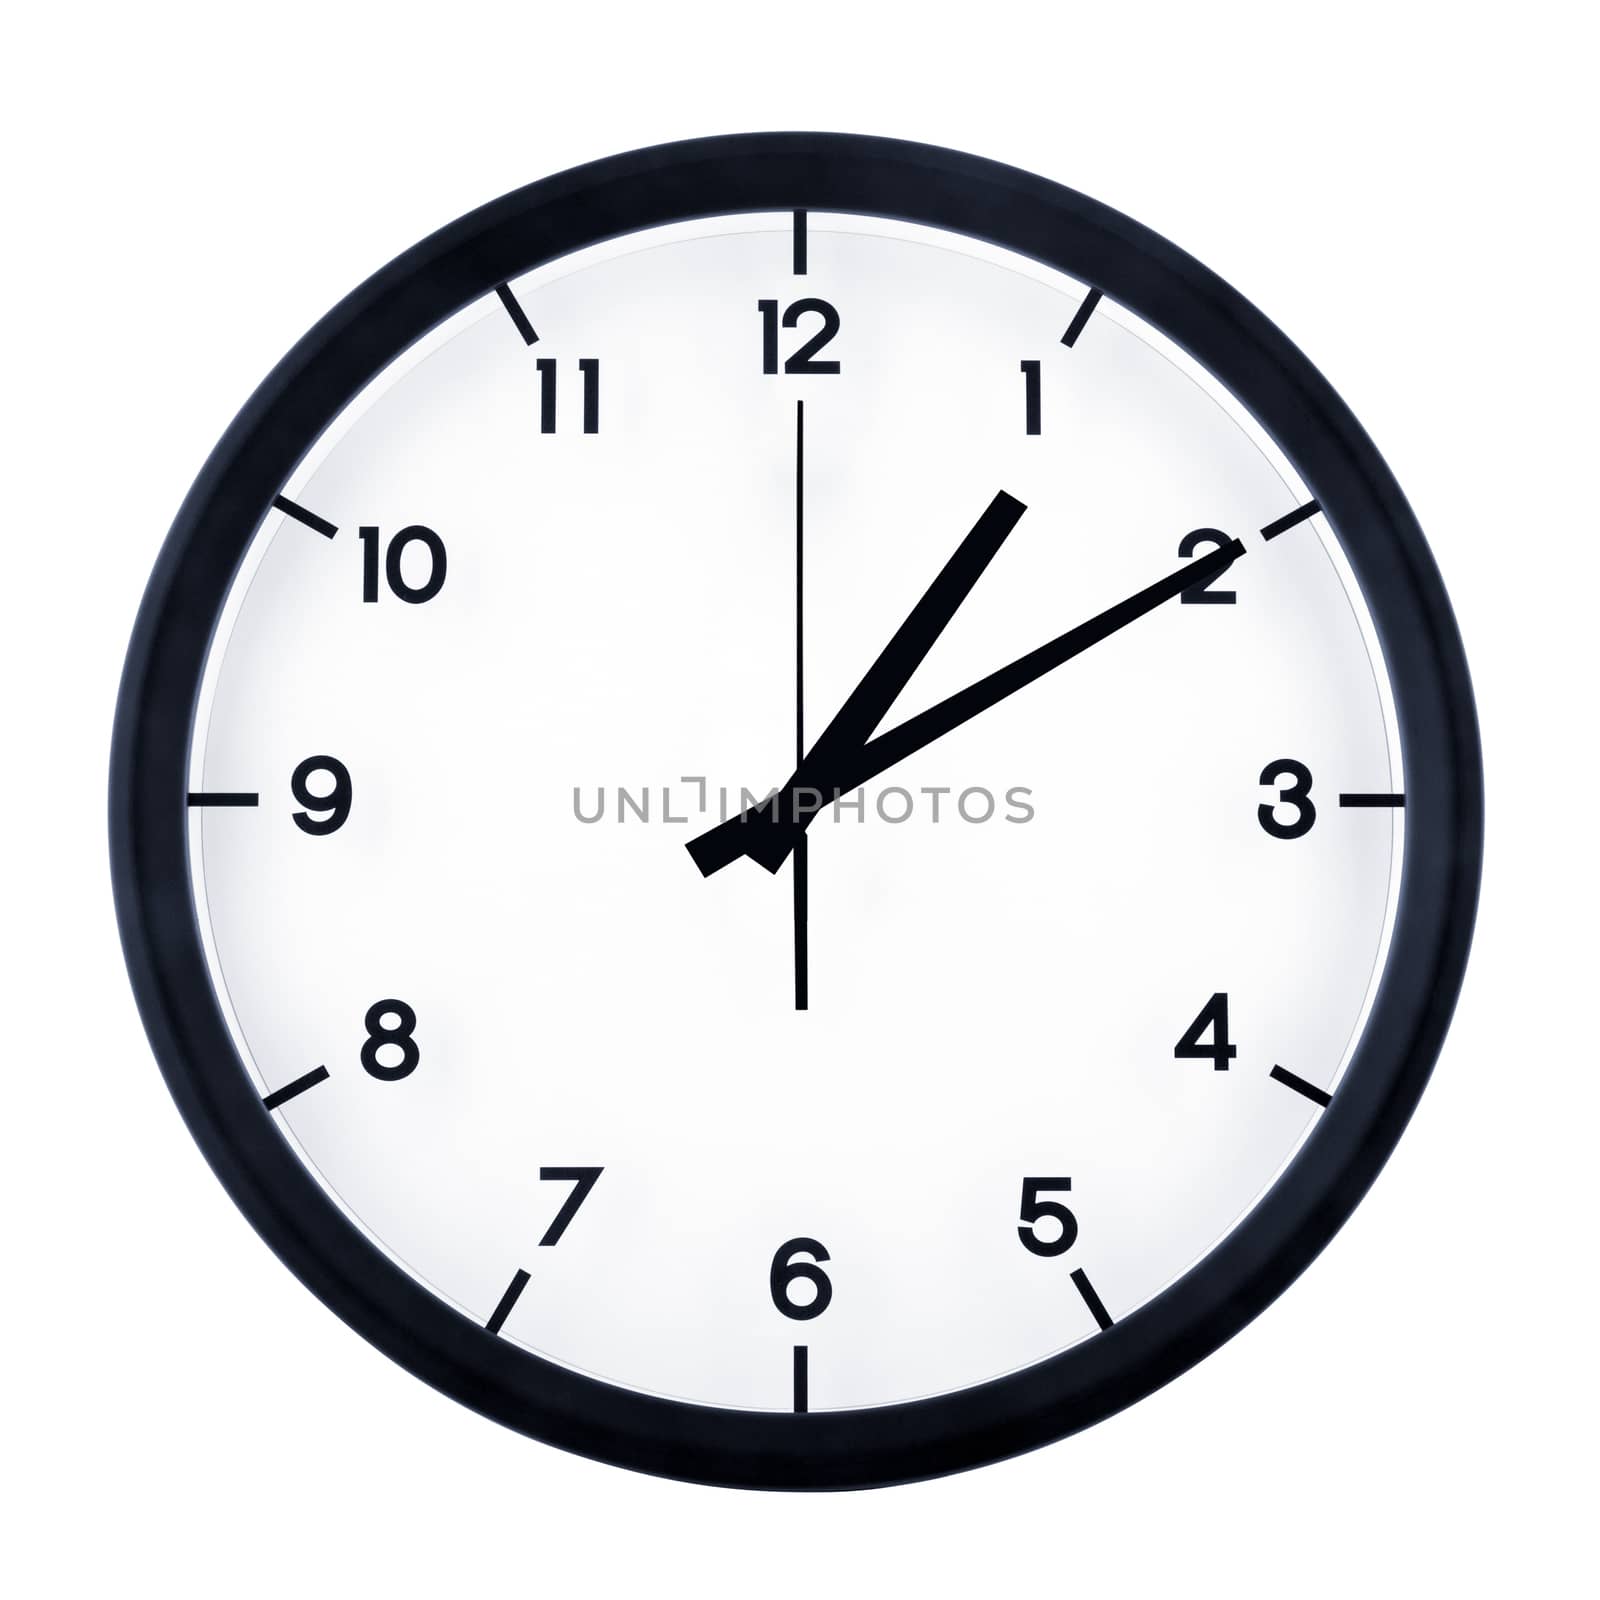 Classic analog clock pointing at one ten, isolated on white background.